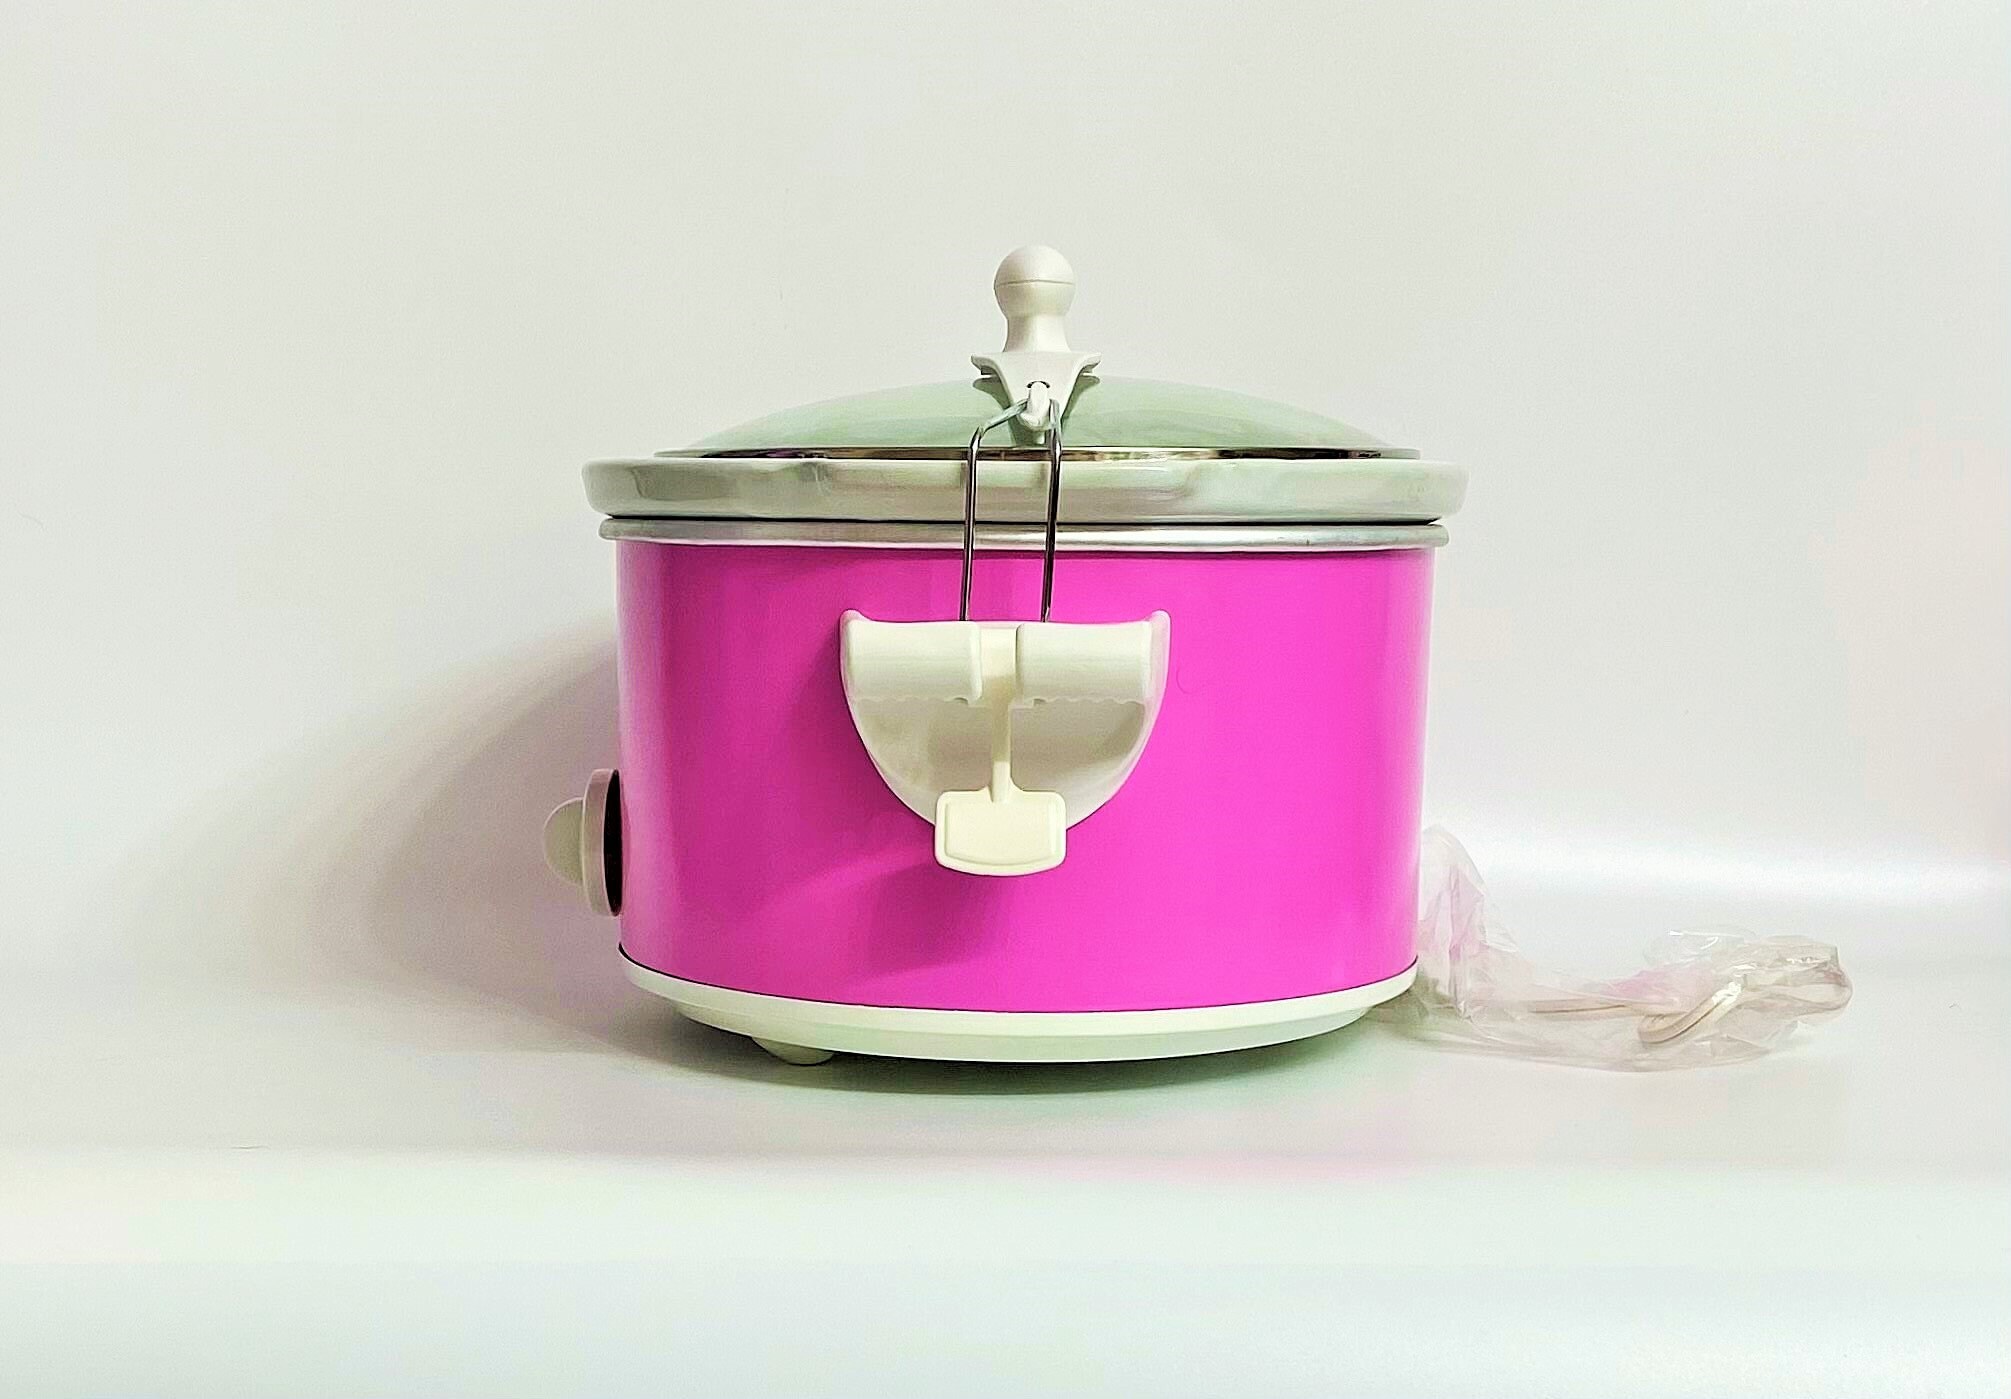 Crockpot's Electric Lunch Boxes Are Super Chic & Only $30 on